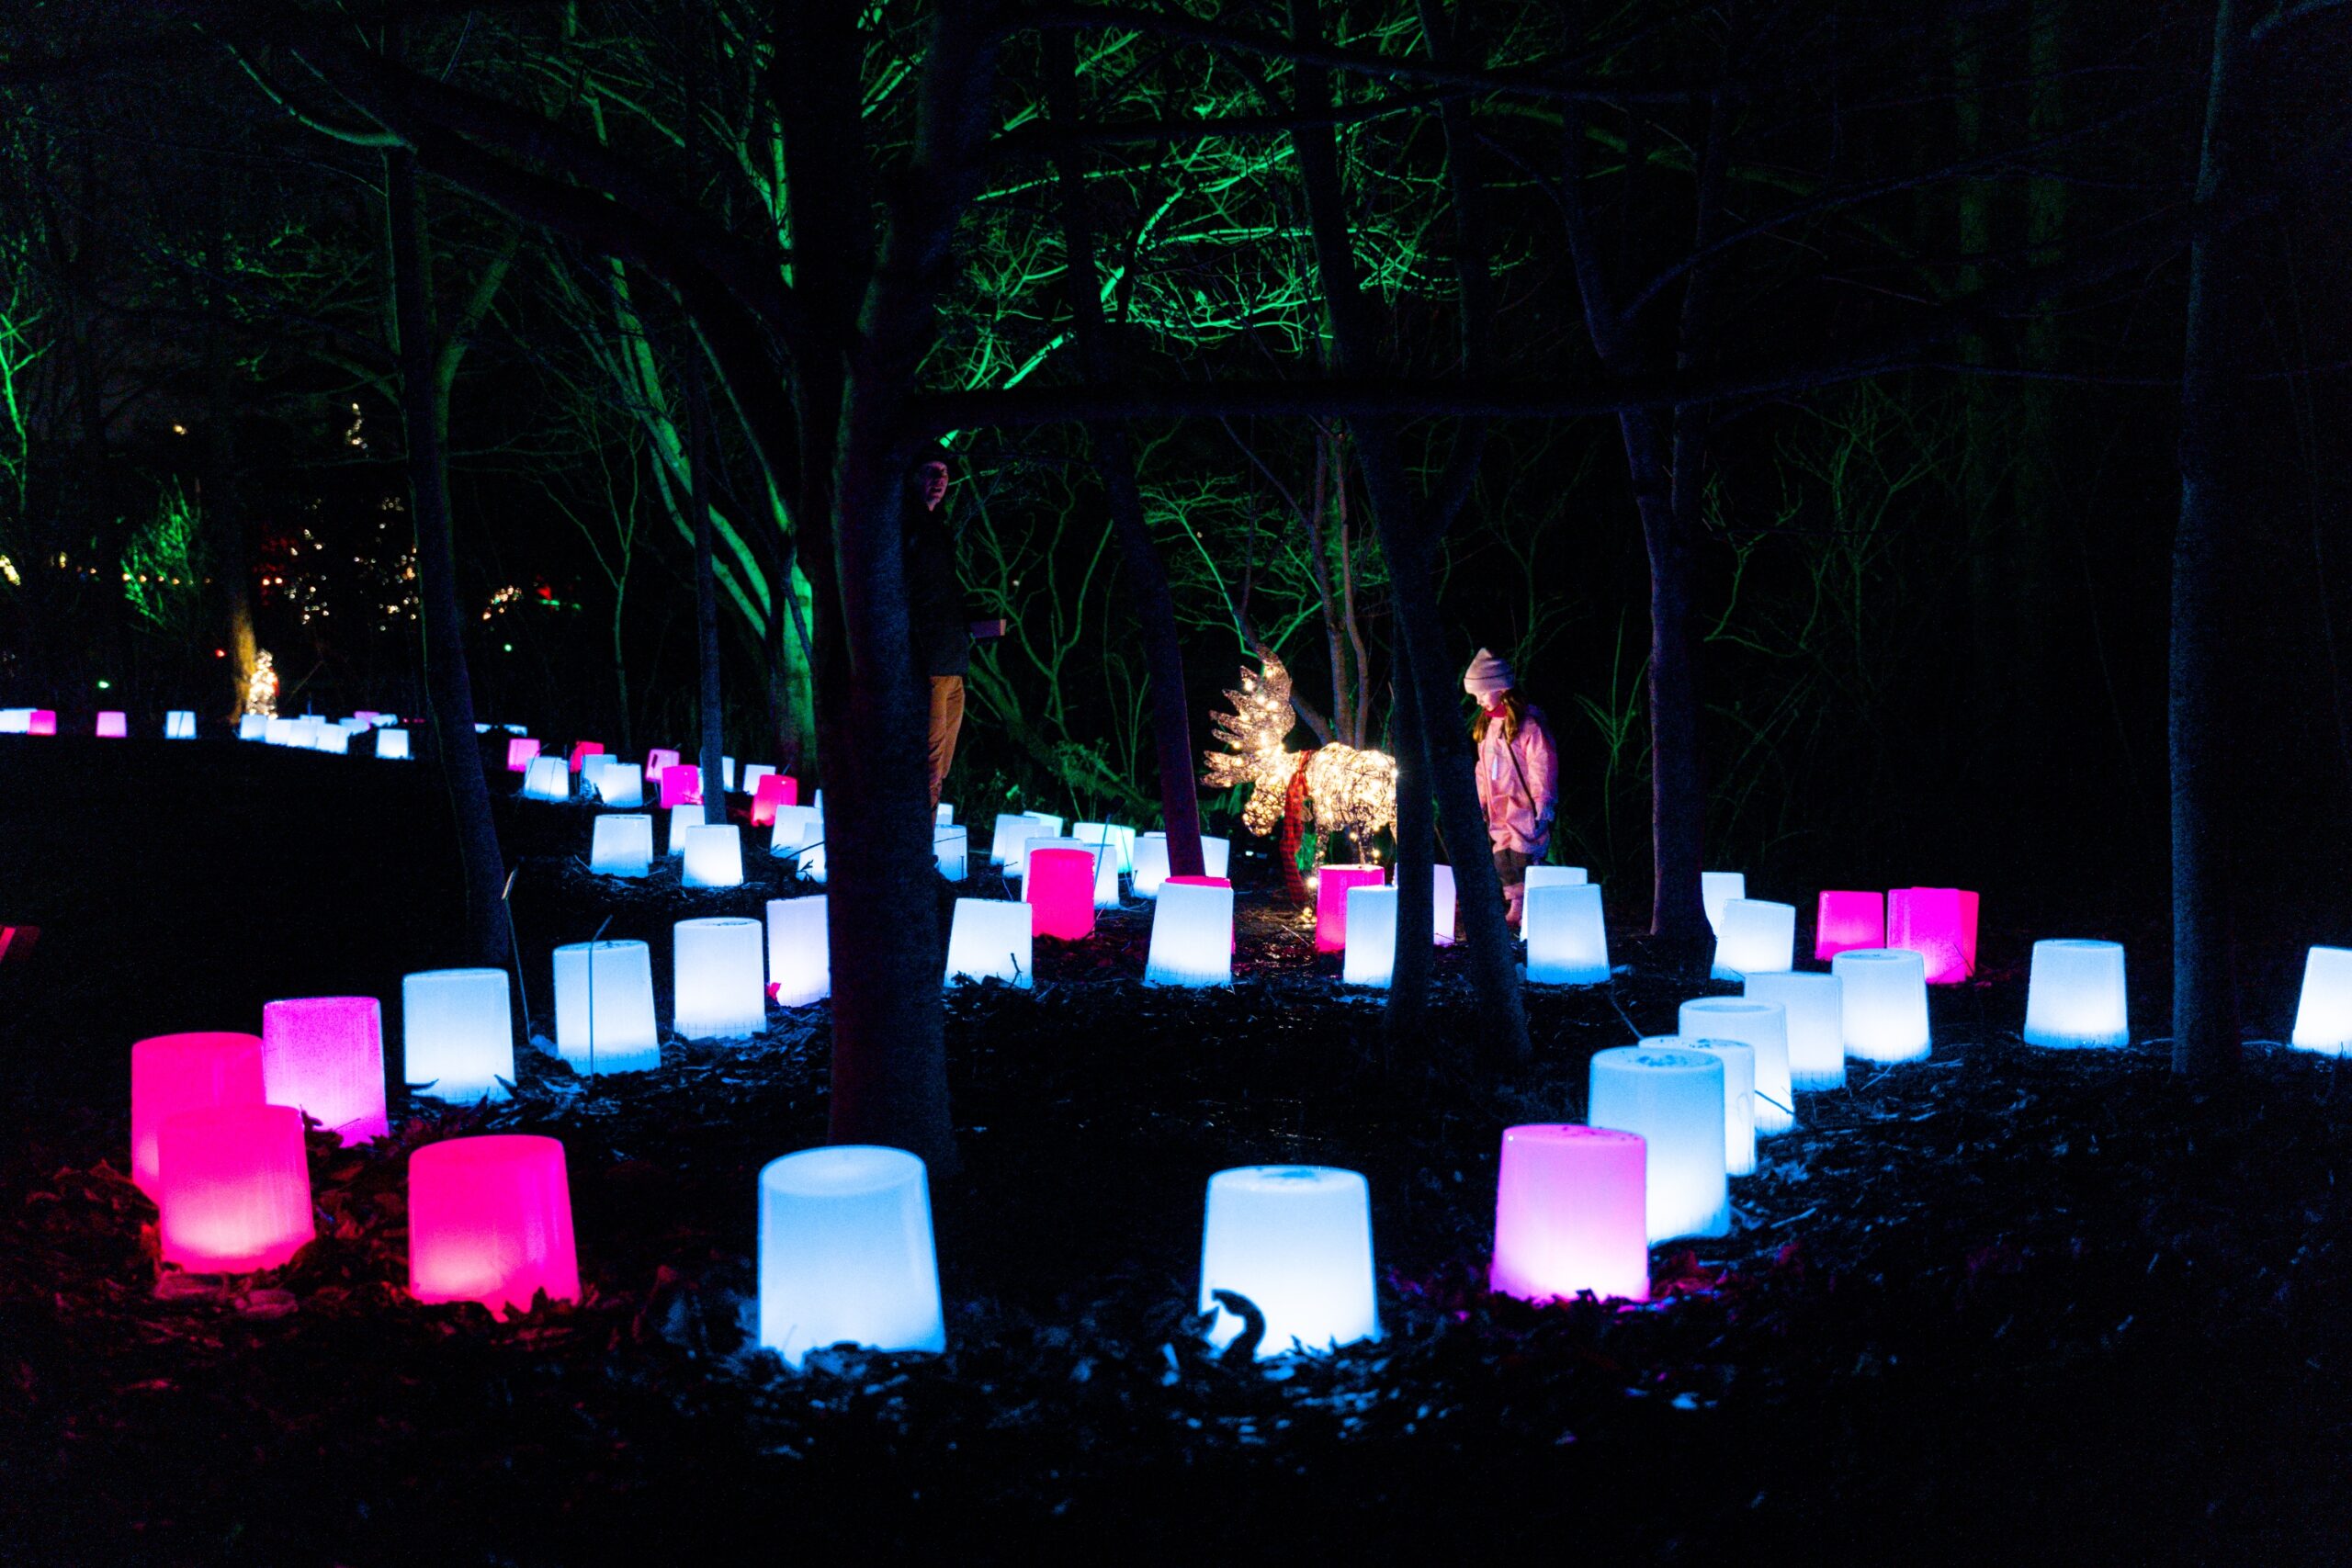 Pink and pale blue lights shaped like upside-down buckets are in a winding line through some trees at the Royal Botanical Gardens in Burlington. A young girl is in the background of the photo, enjoying the coloured lights.